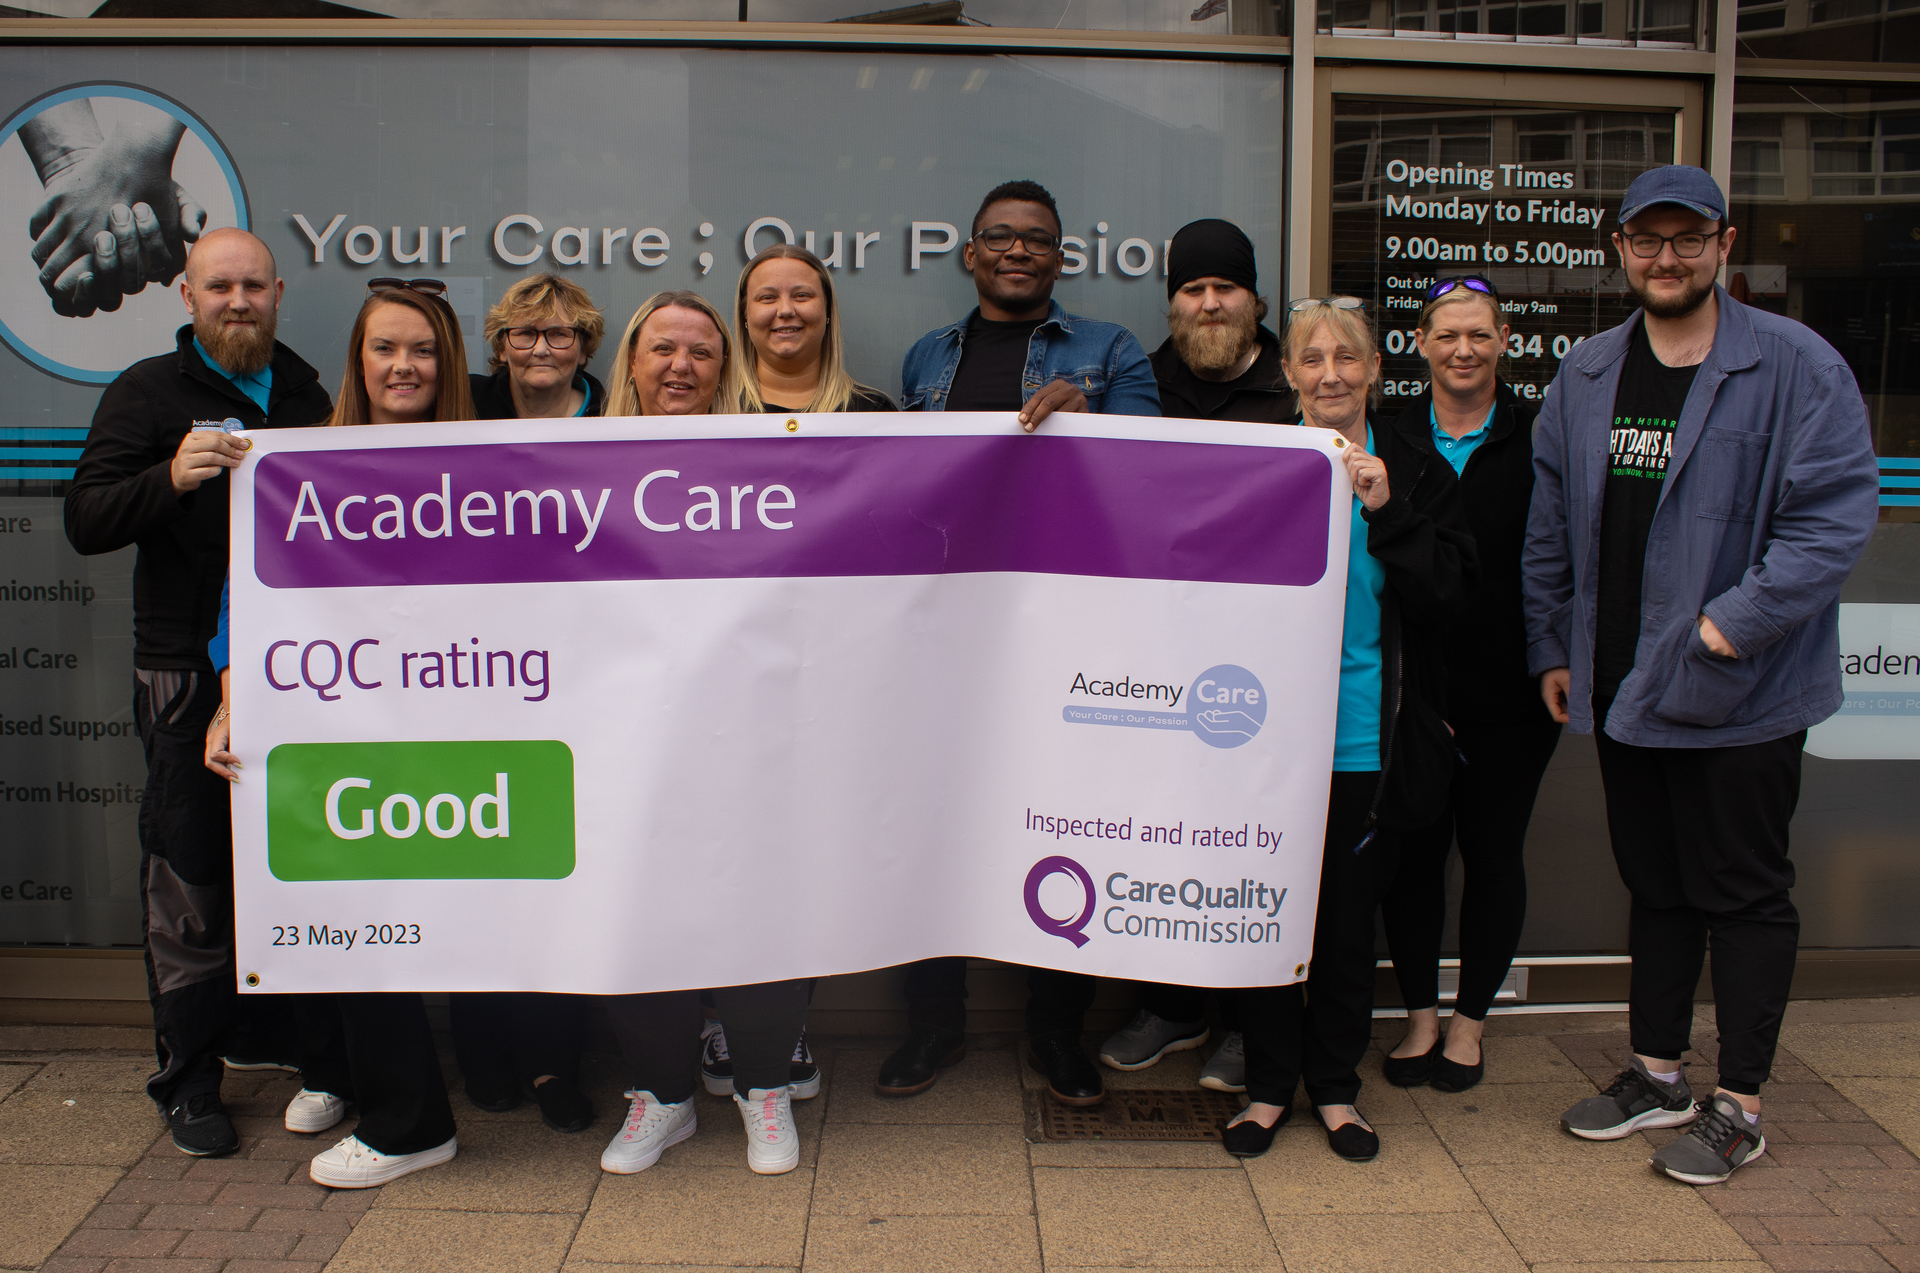 Group photo with CQC rating